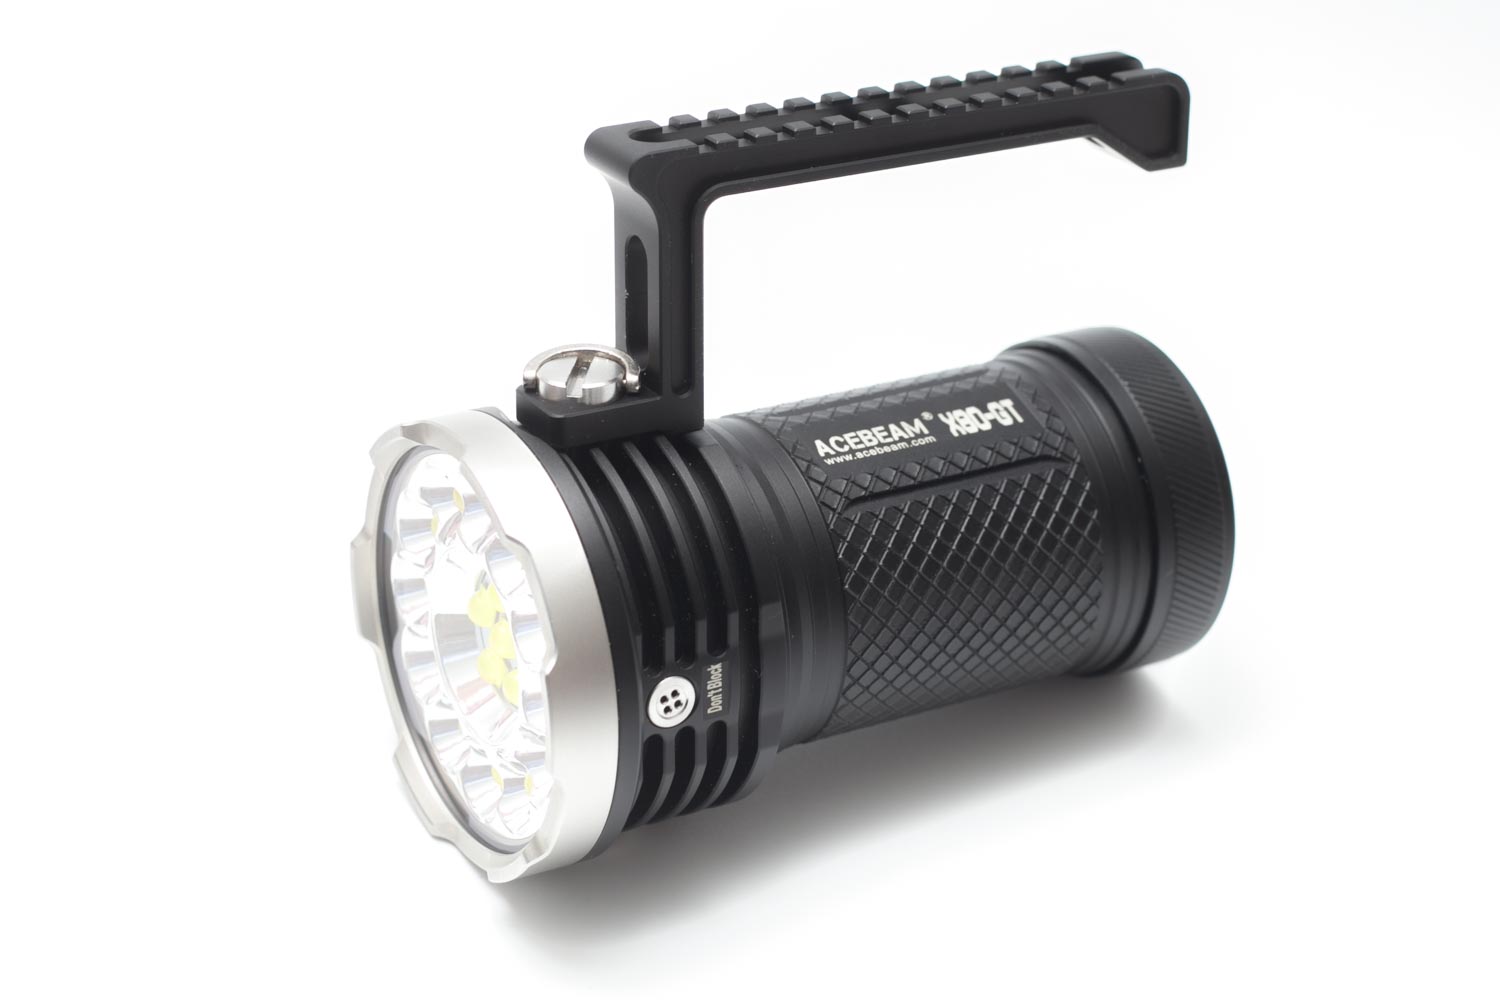 acebeam x80 gt including the carry handle